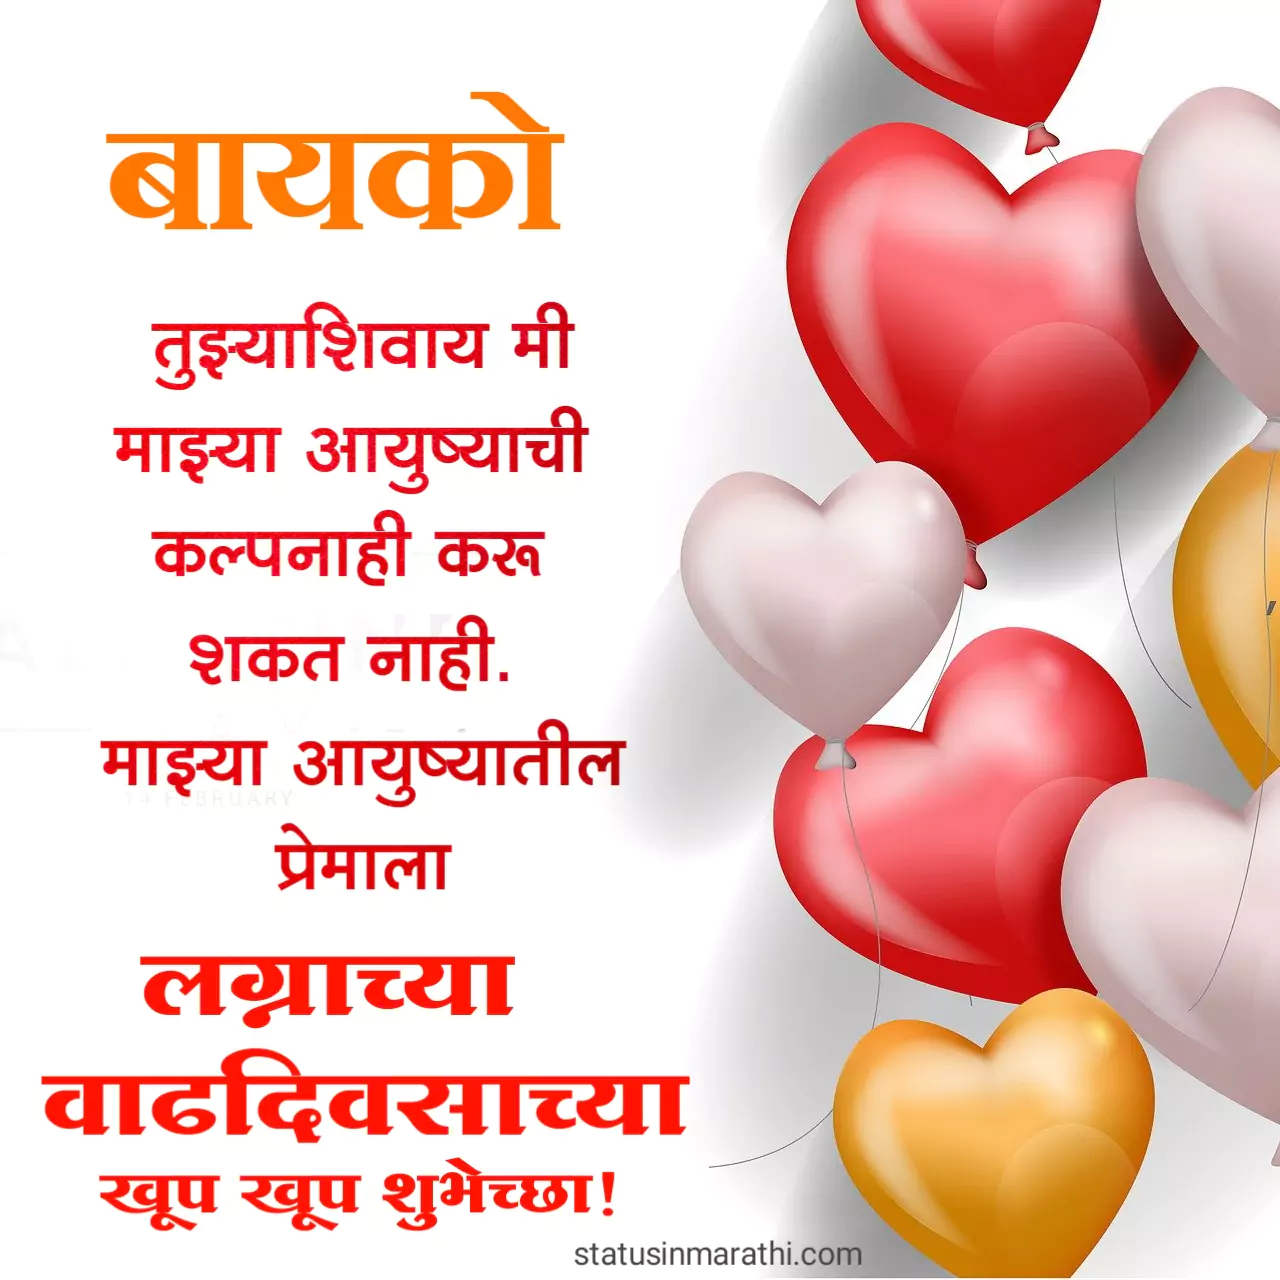 Happy Marriage Anniversary wishes for Wife in marathi